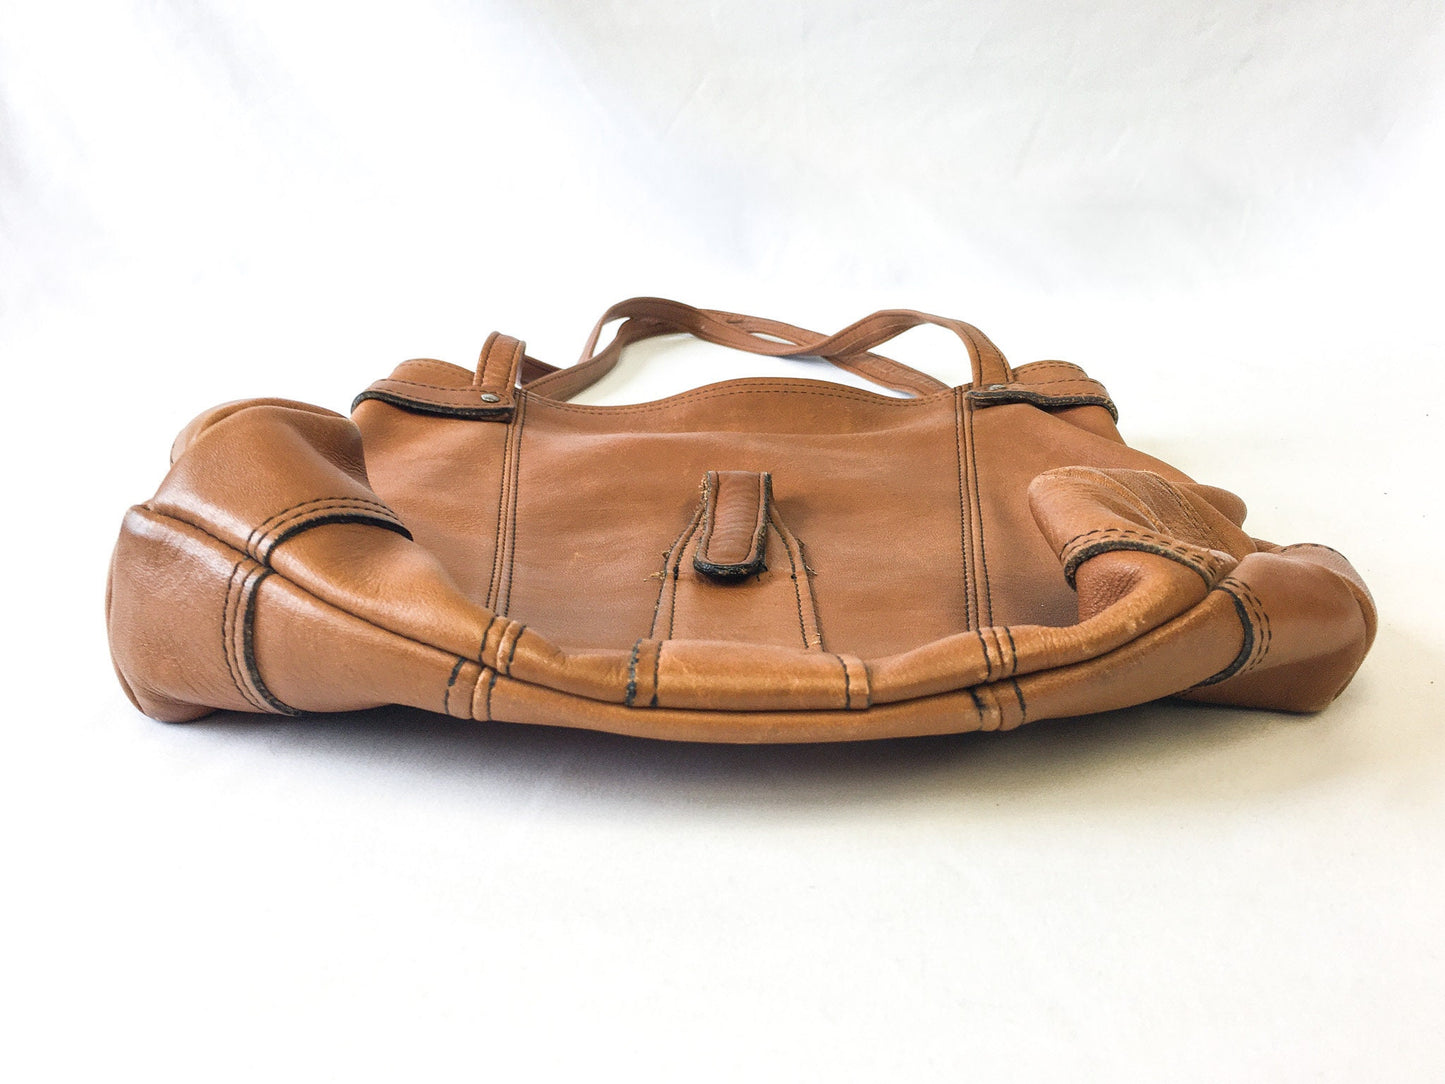 Vintage Boots and Saddle by Colonial Brown Leather Tote Bag, Vintage Leather Handbag